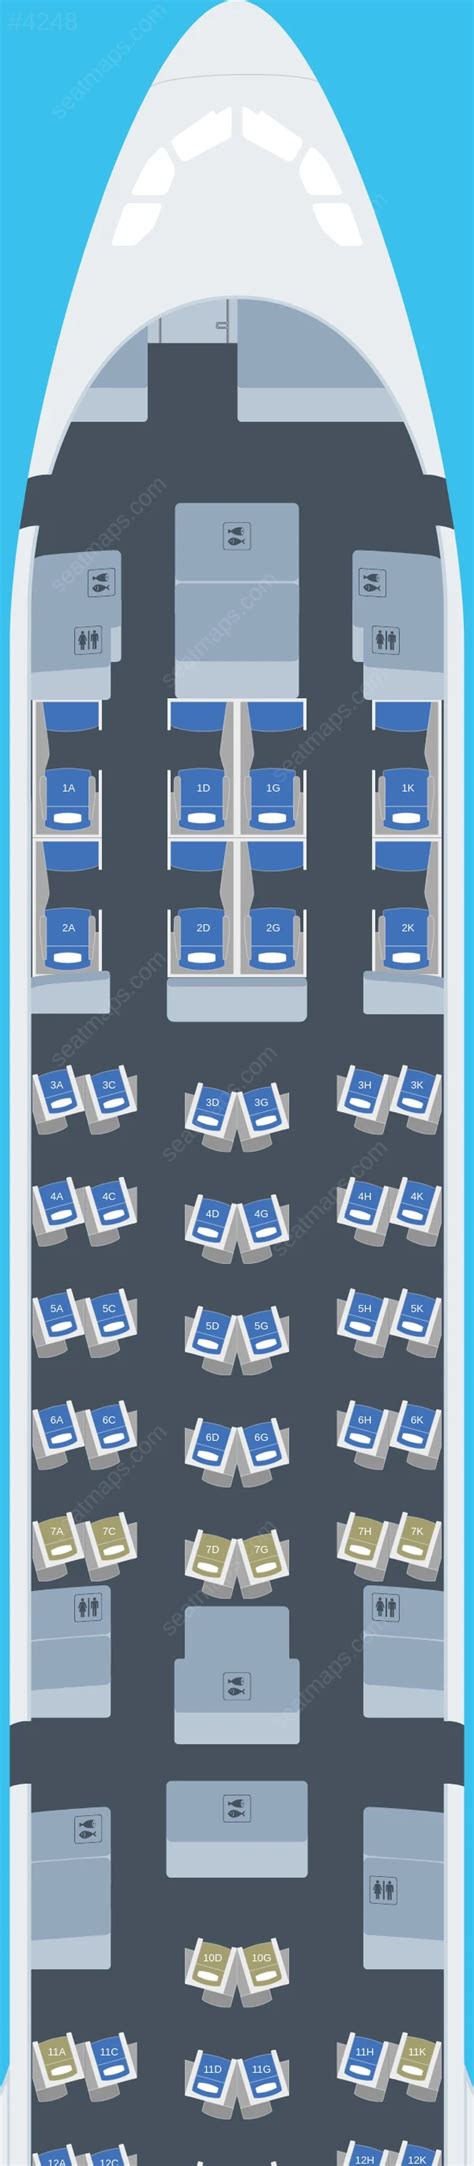 Lufthansa Seating Chart A340 300 Elcho Table